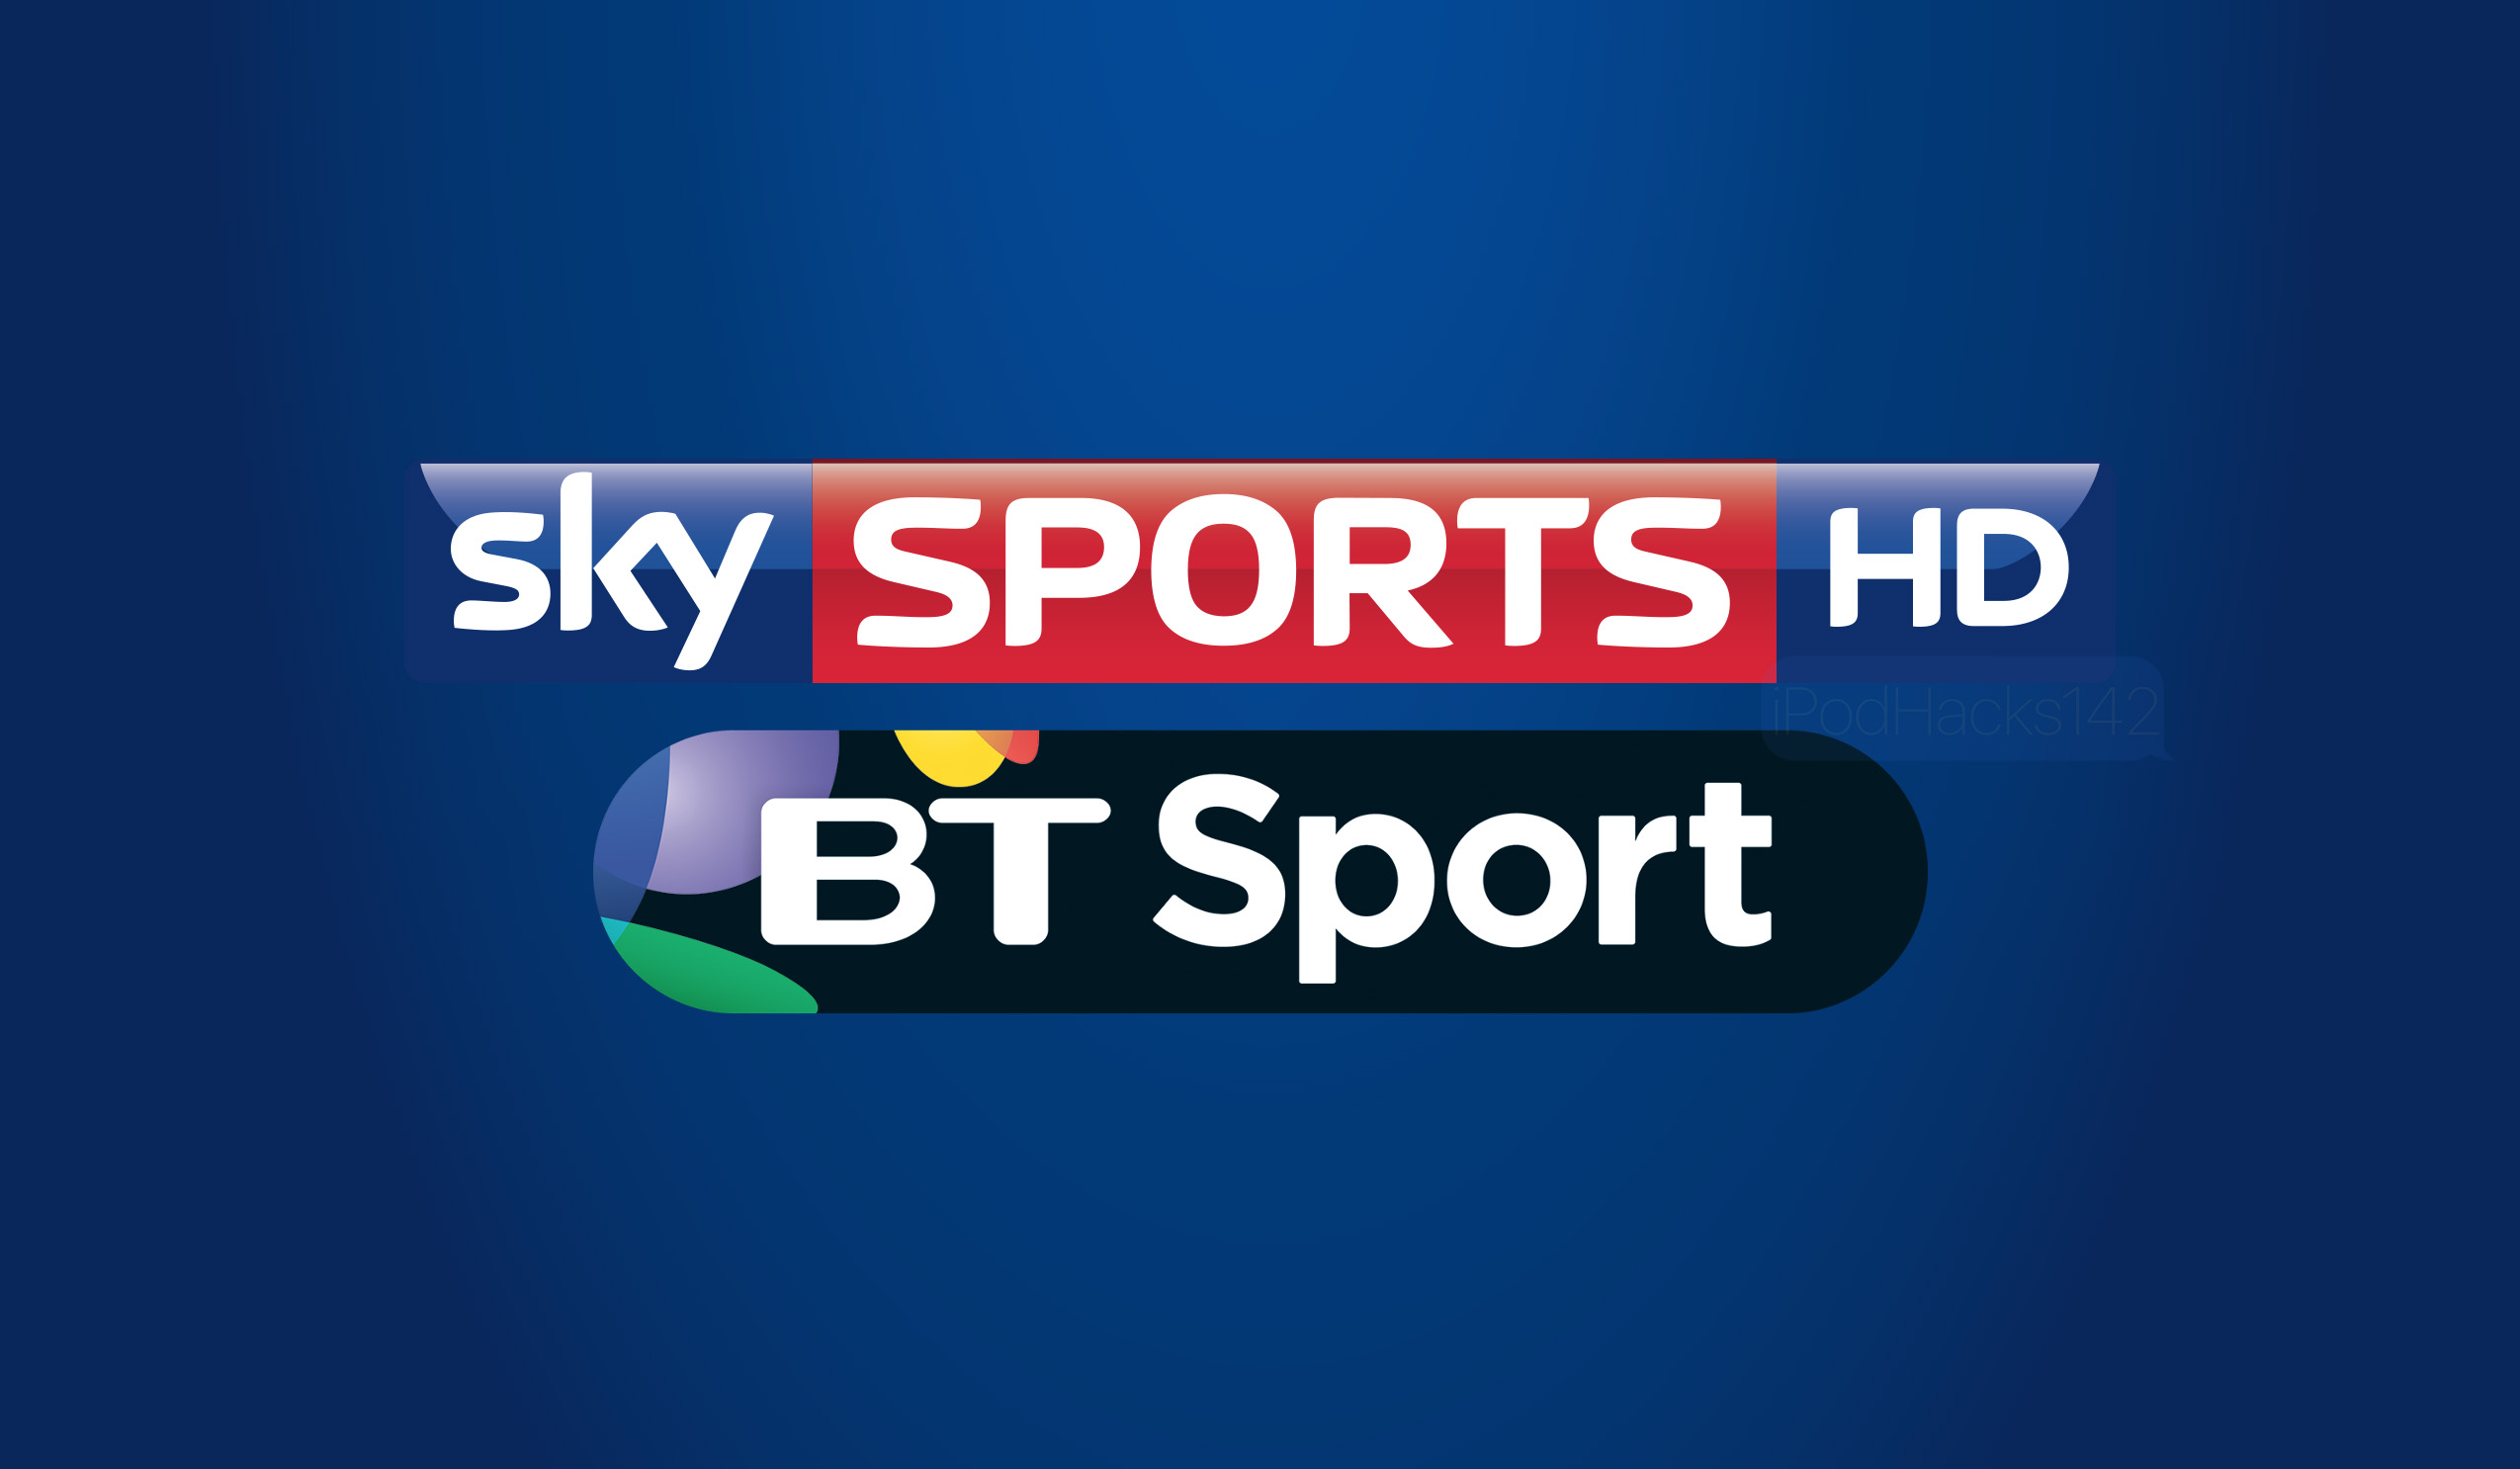 How to Watch Sky Sports, BT Sports, and More Live for Free on iOS/Android/PC 